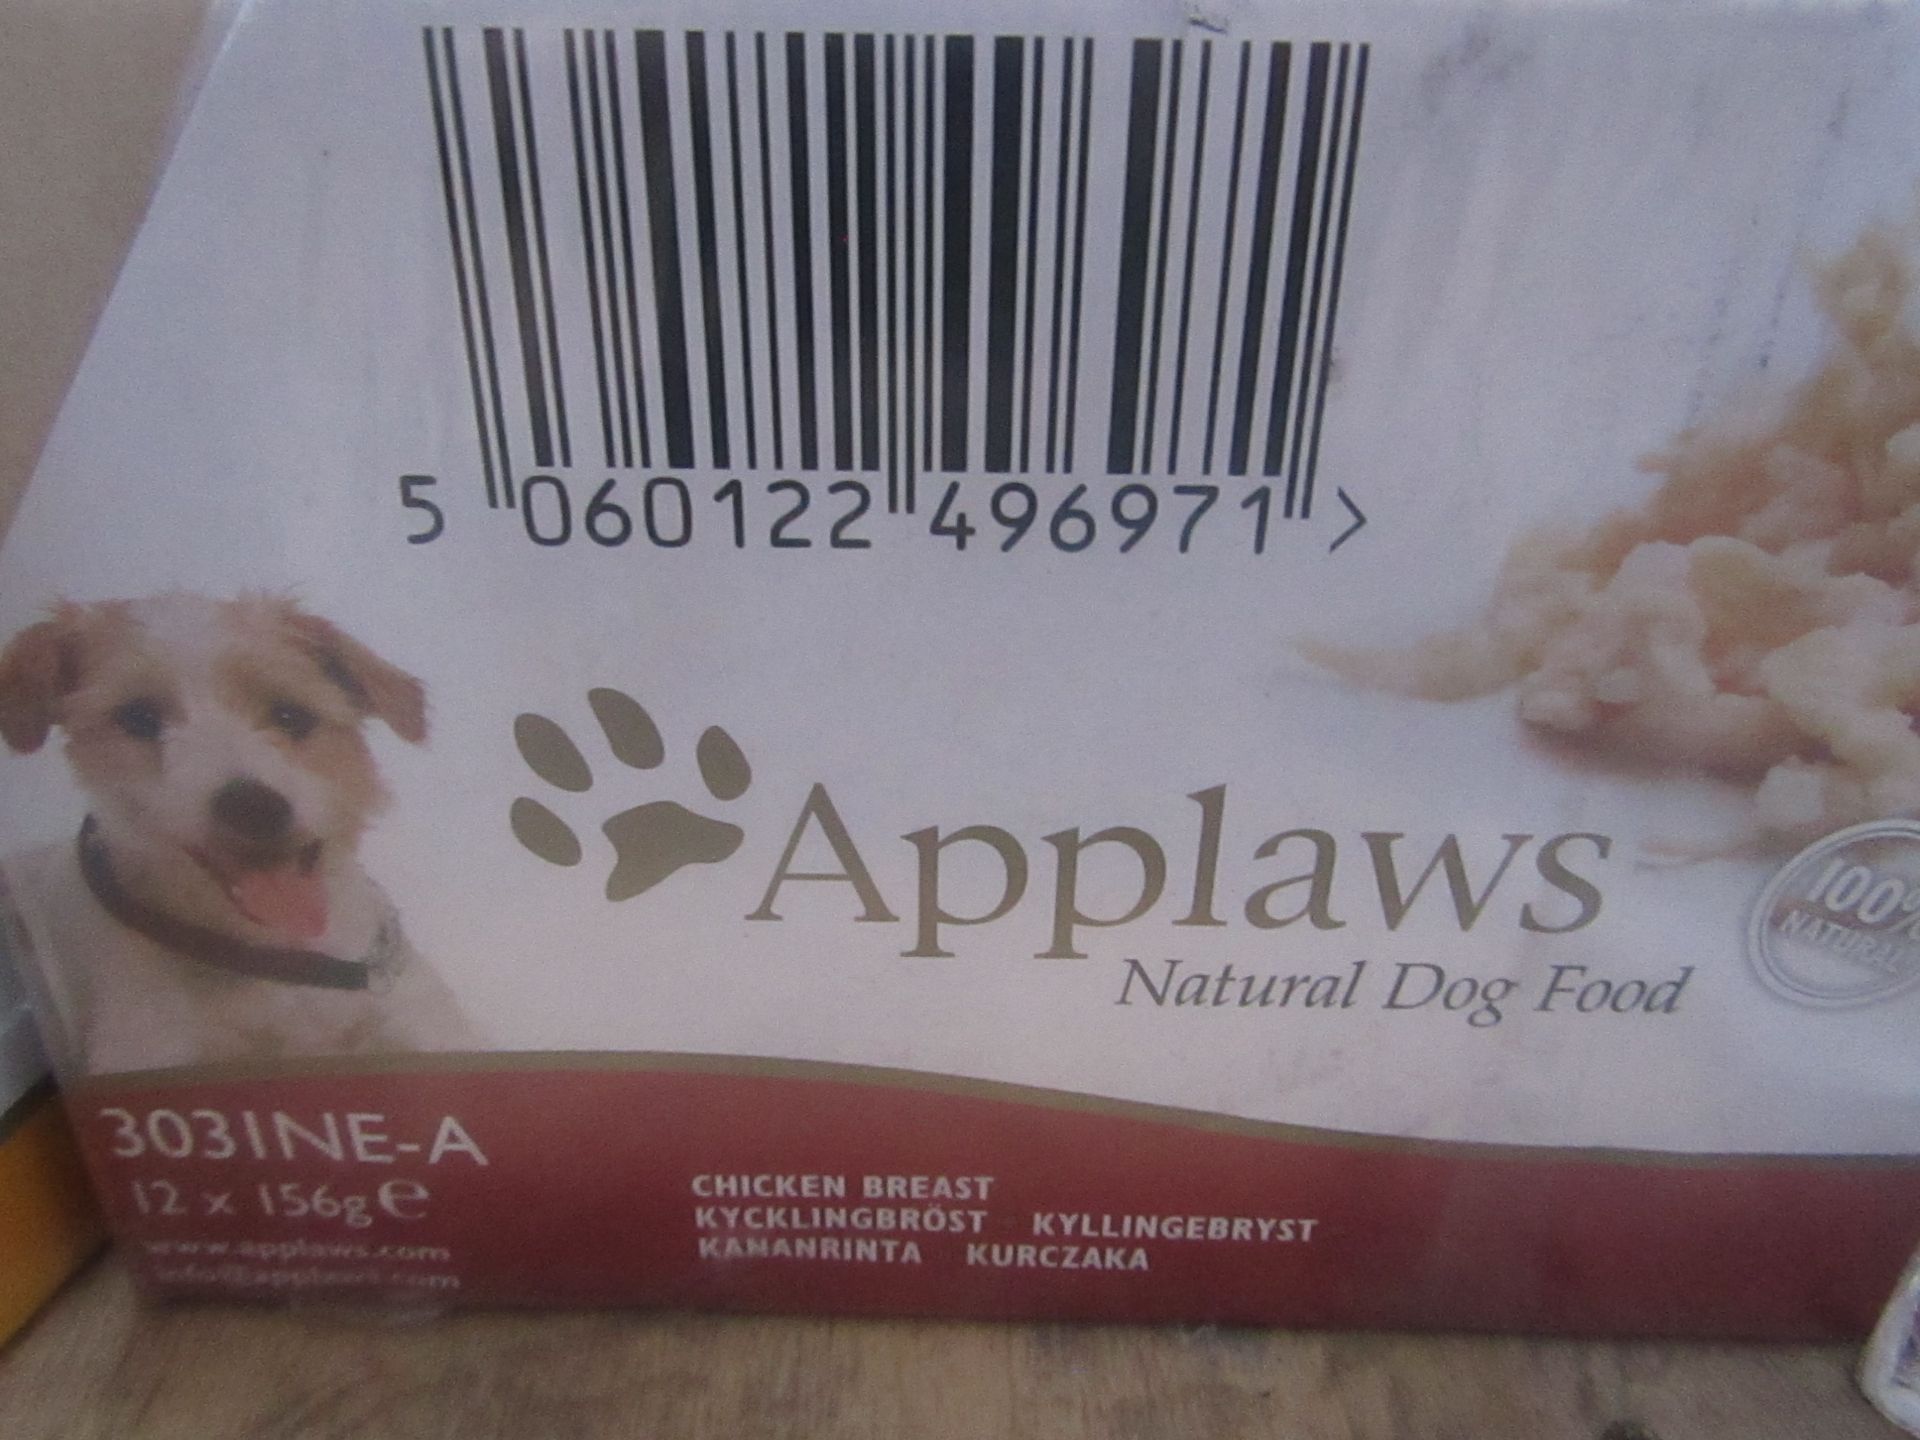 Applaws - Natural Dog Food (Chicken Breast) (12x 156g) - BBD 04/23 - New & Boxed.